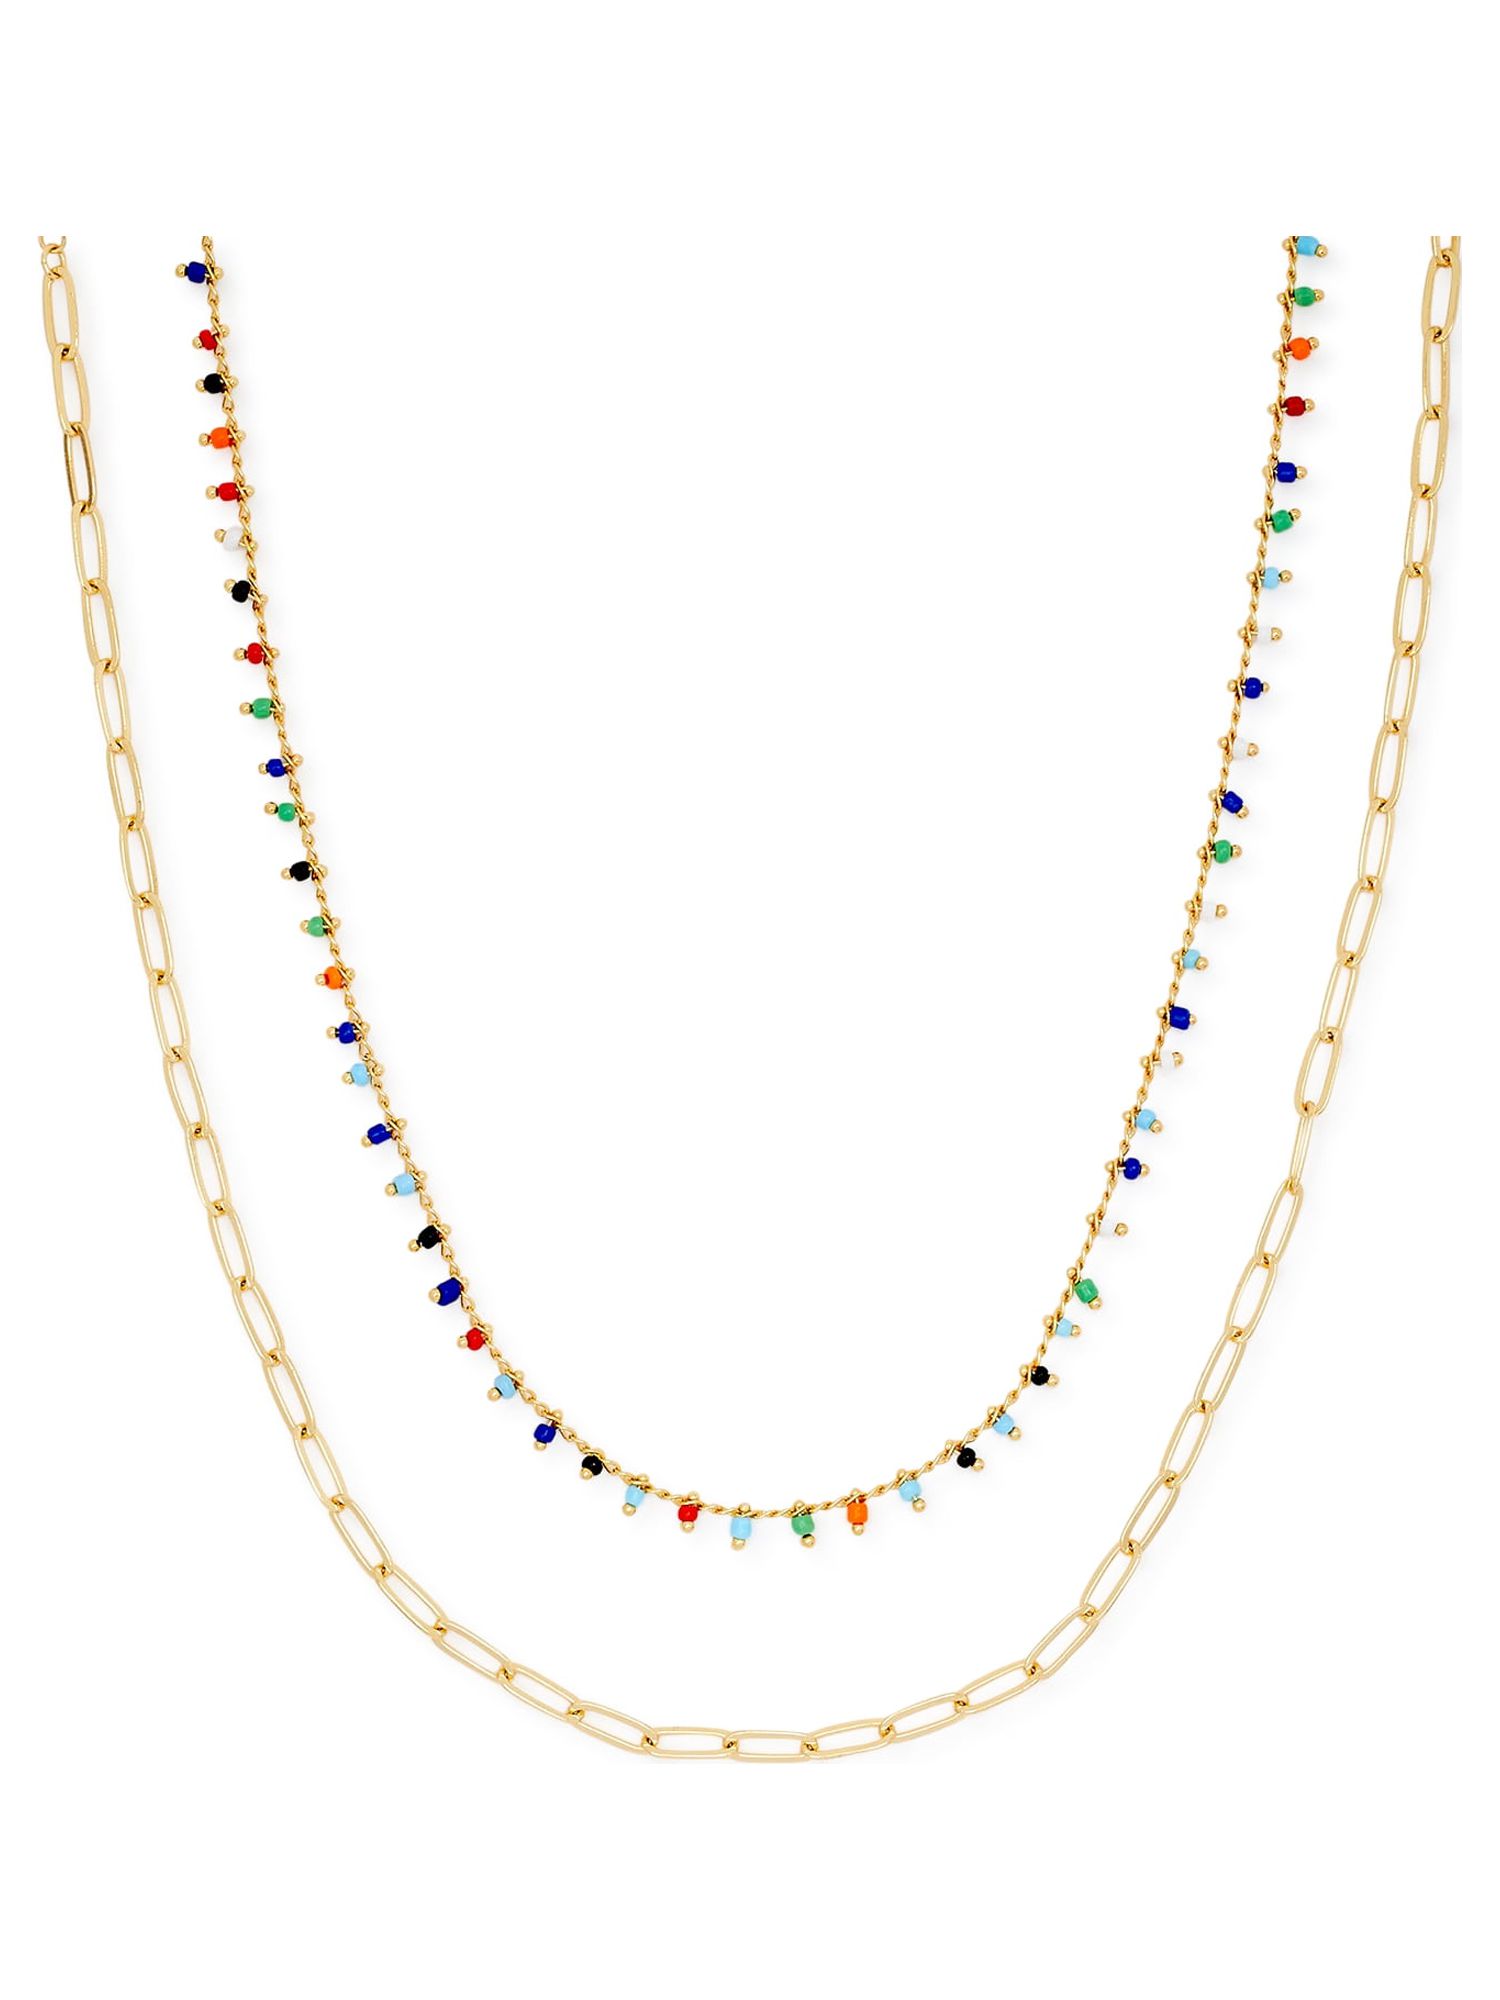 Scoop Womens 14K Gold Flash-Plated Link Chain and Multi-Color Bead Charm Necklace Duo, 2-Piece - image 1 of 3